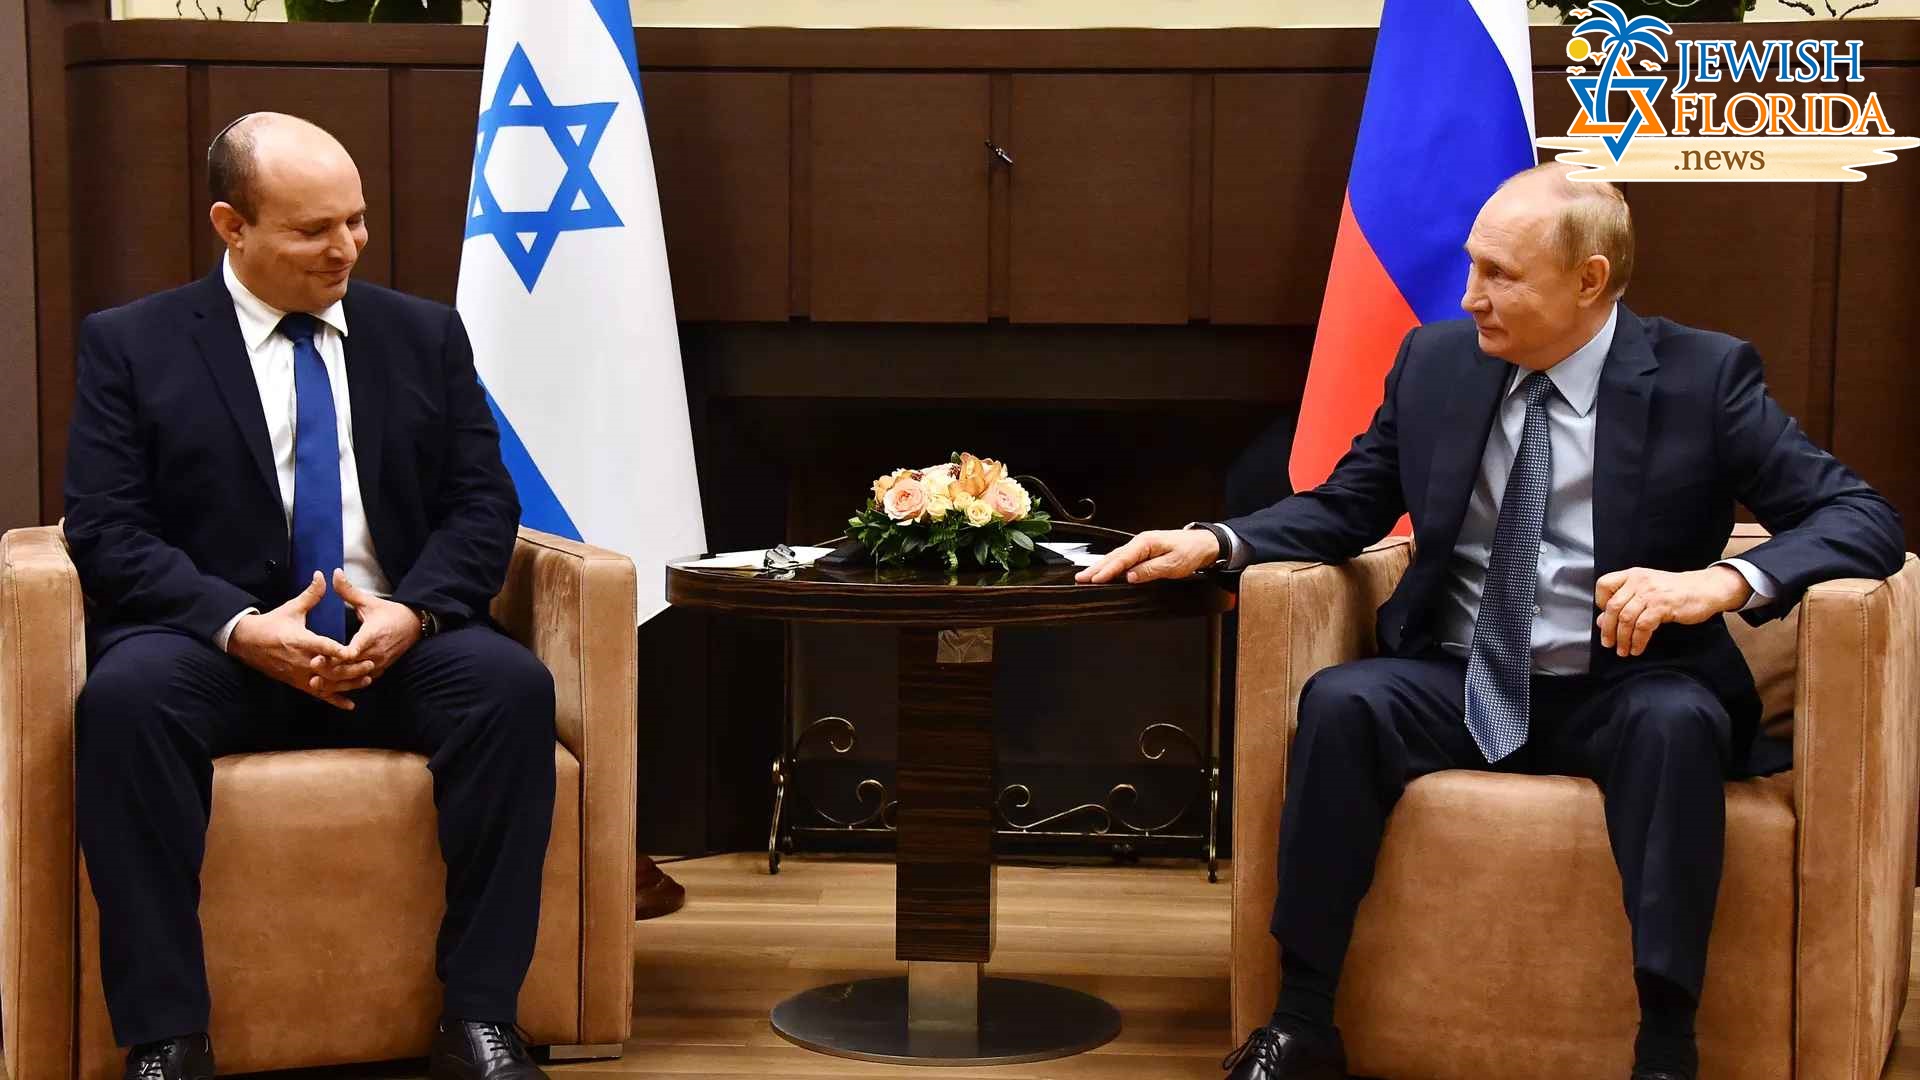 Israeli officials say Russia-Ukraine ceasefire talks at critical point